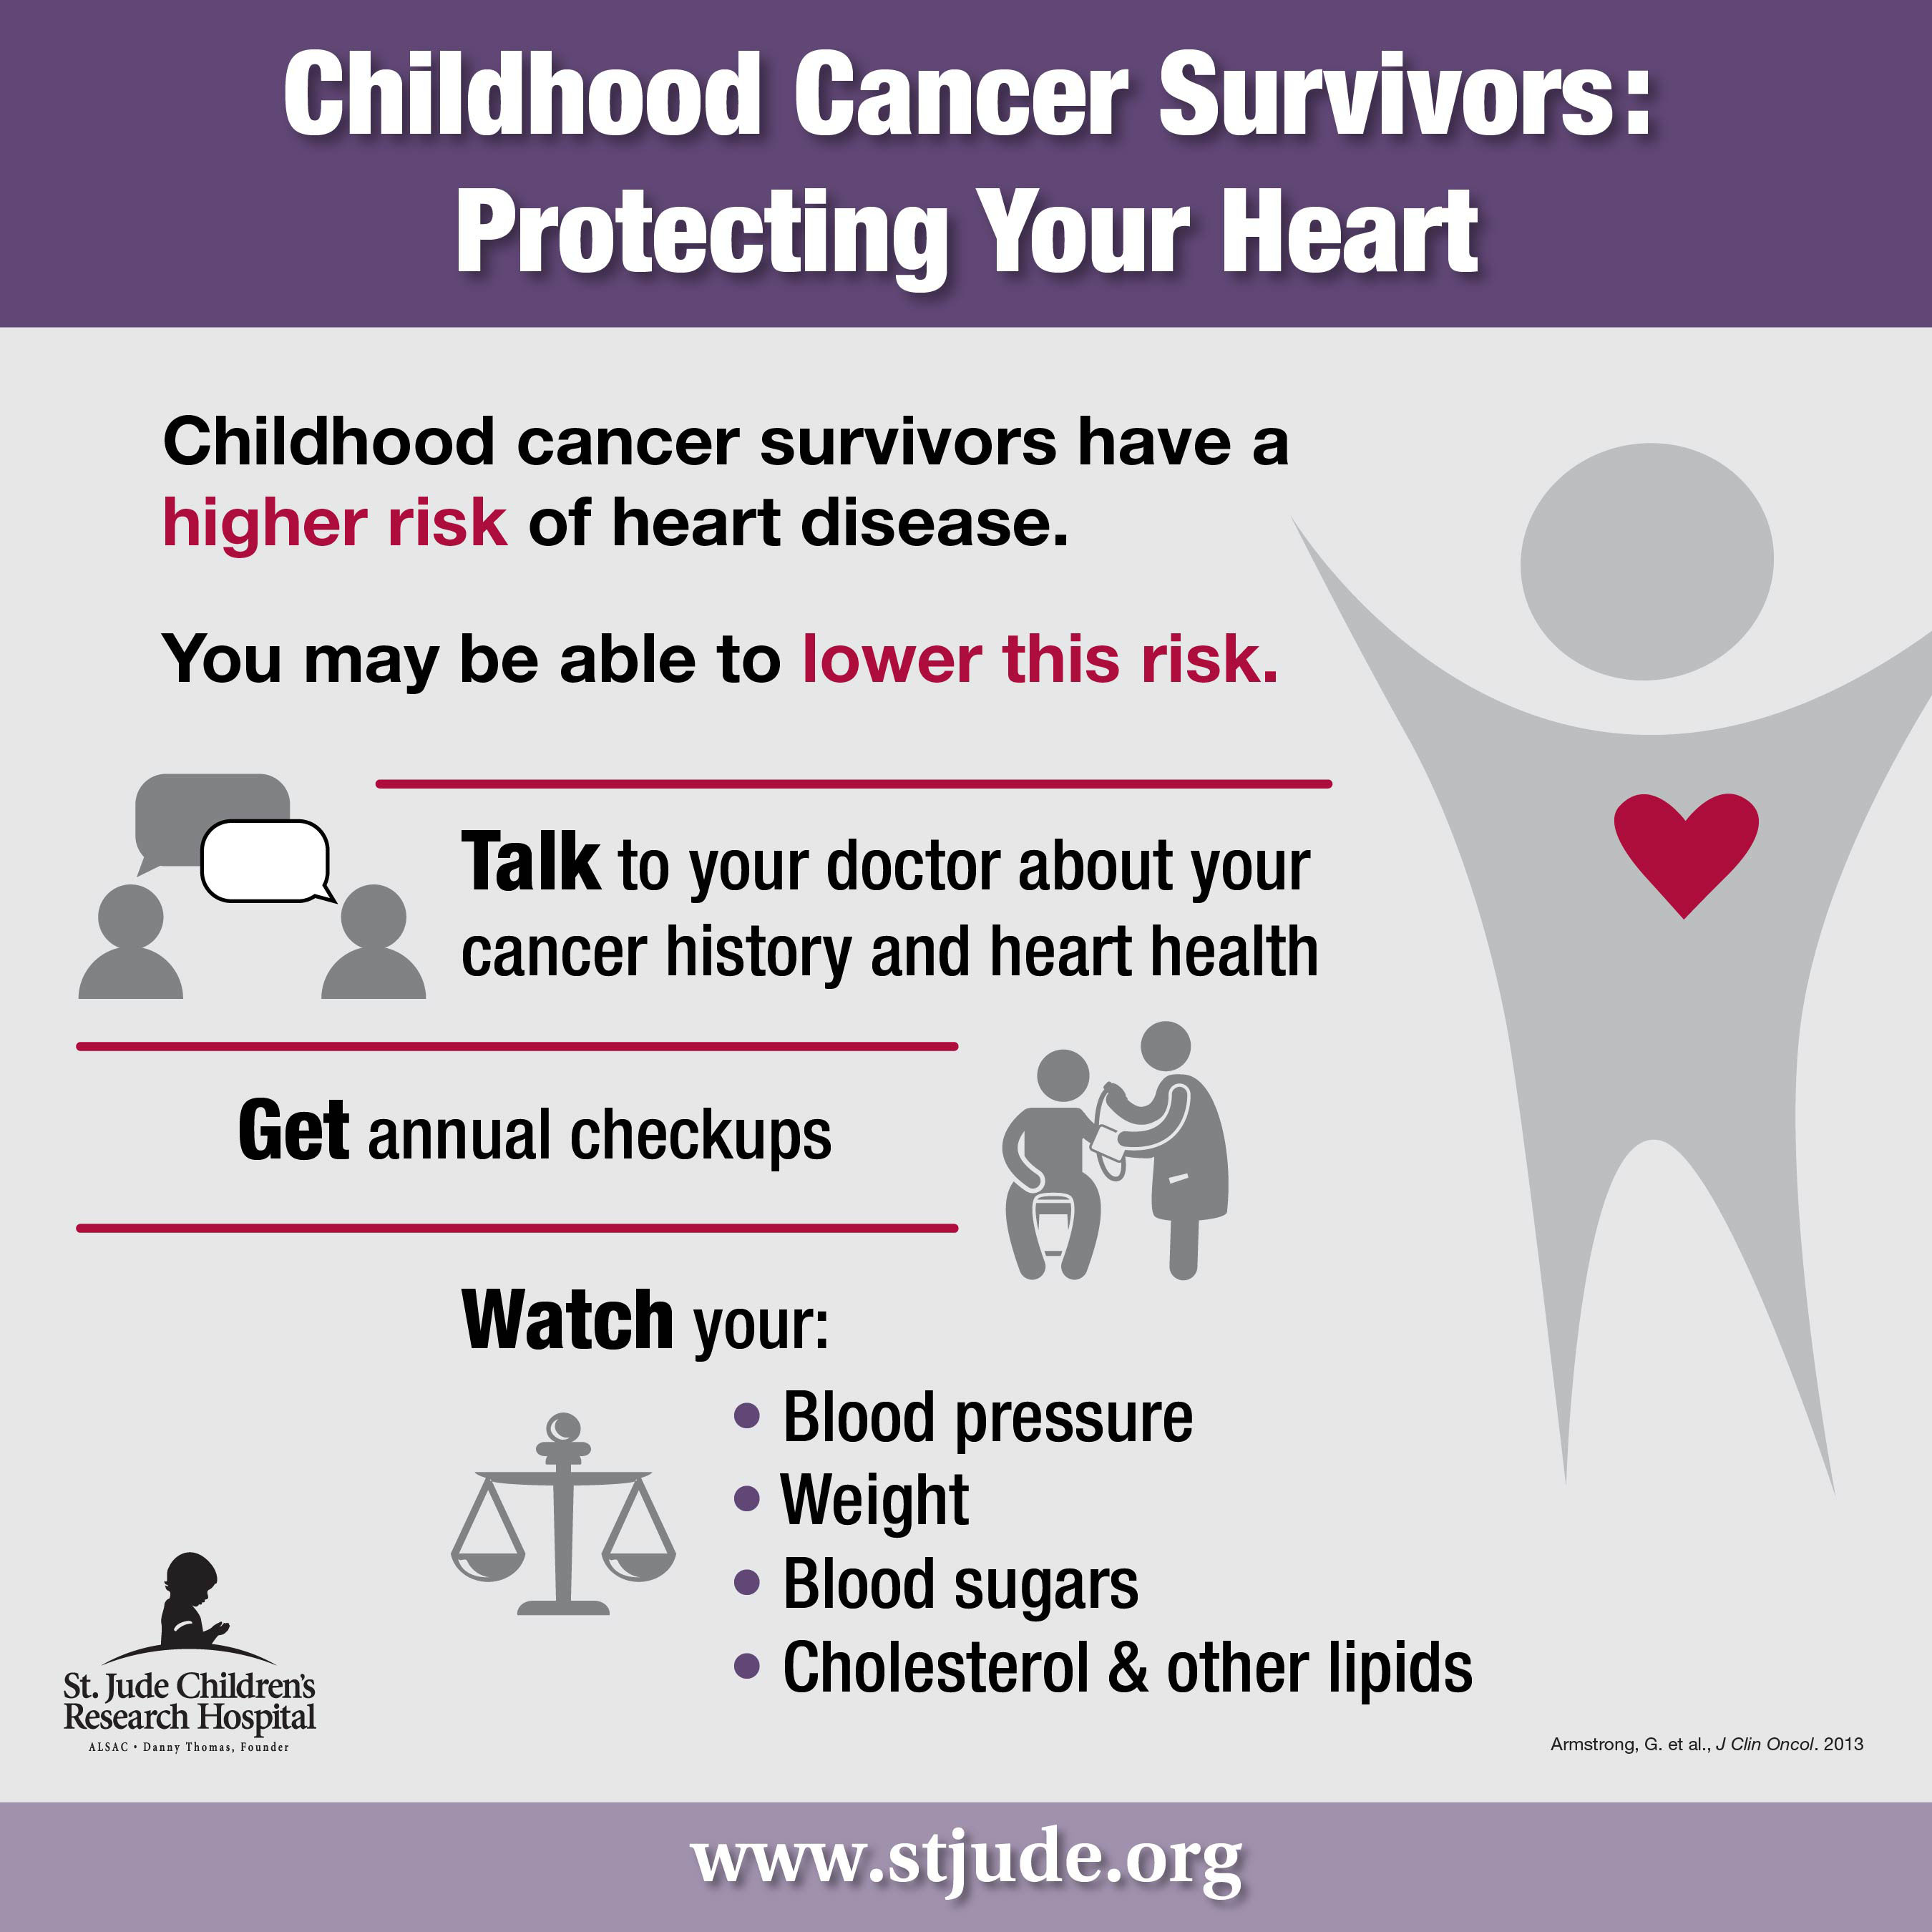 Hypertension, diabetes, obesity and high blood lipid levels significantly increase the risk that childhood cancer survivors will develop serious cardiovascular disease as adults.